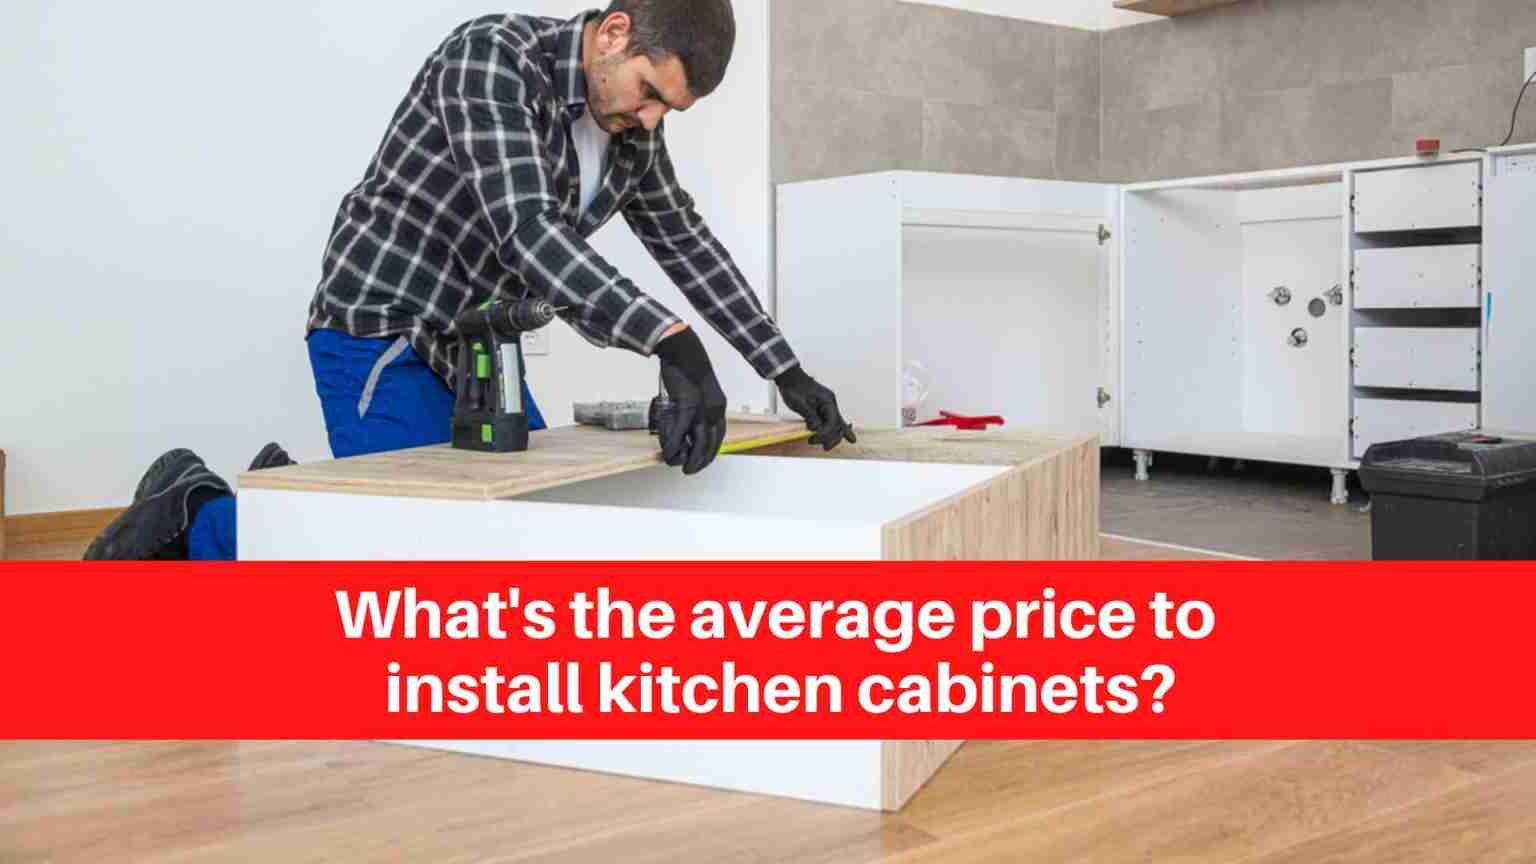 What's the average price to install kitchen cabinets